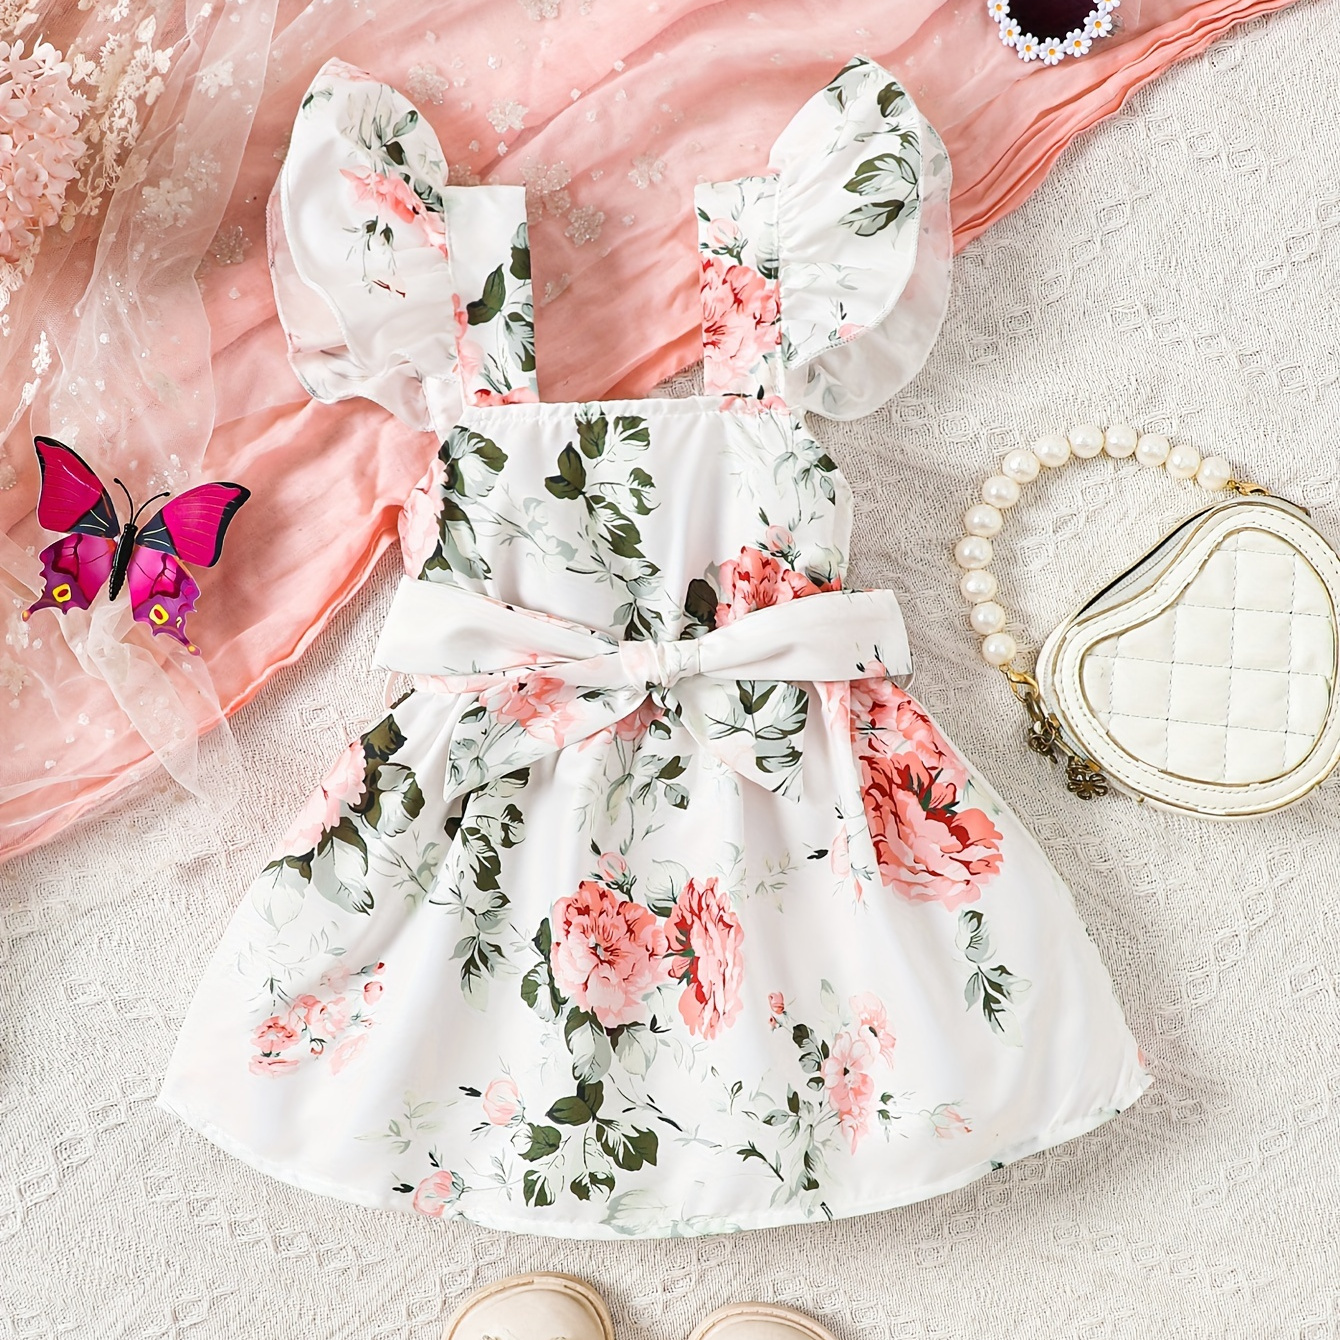 

Baby's Floral Pattern Belted Dress, Casual Cap Sleeve Dress, Infant & Toddler Girl's Clothing For Summer/spring, As Gift